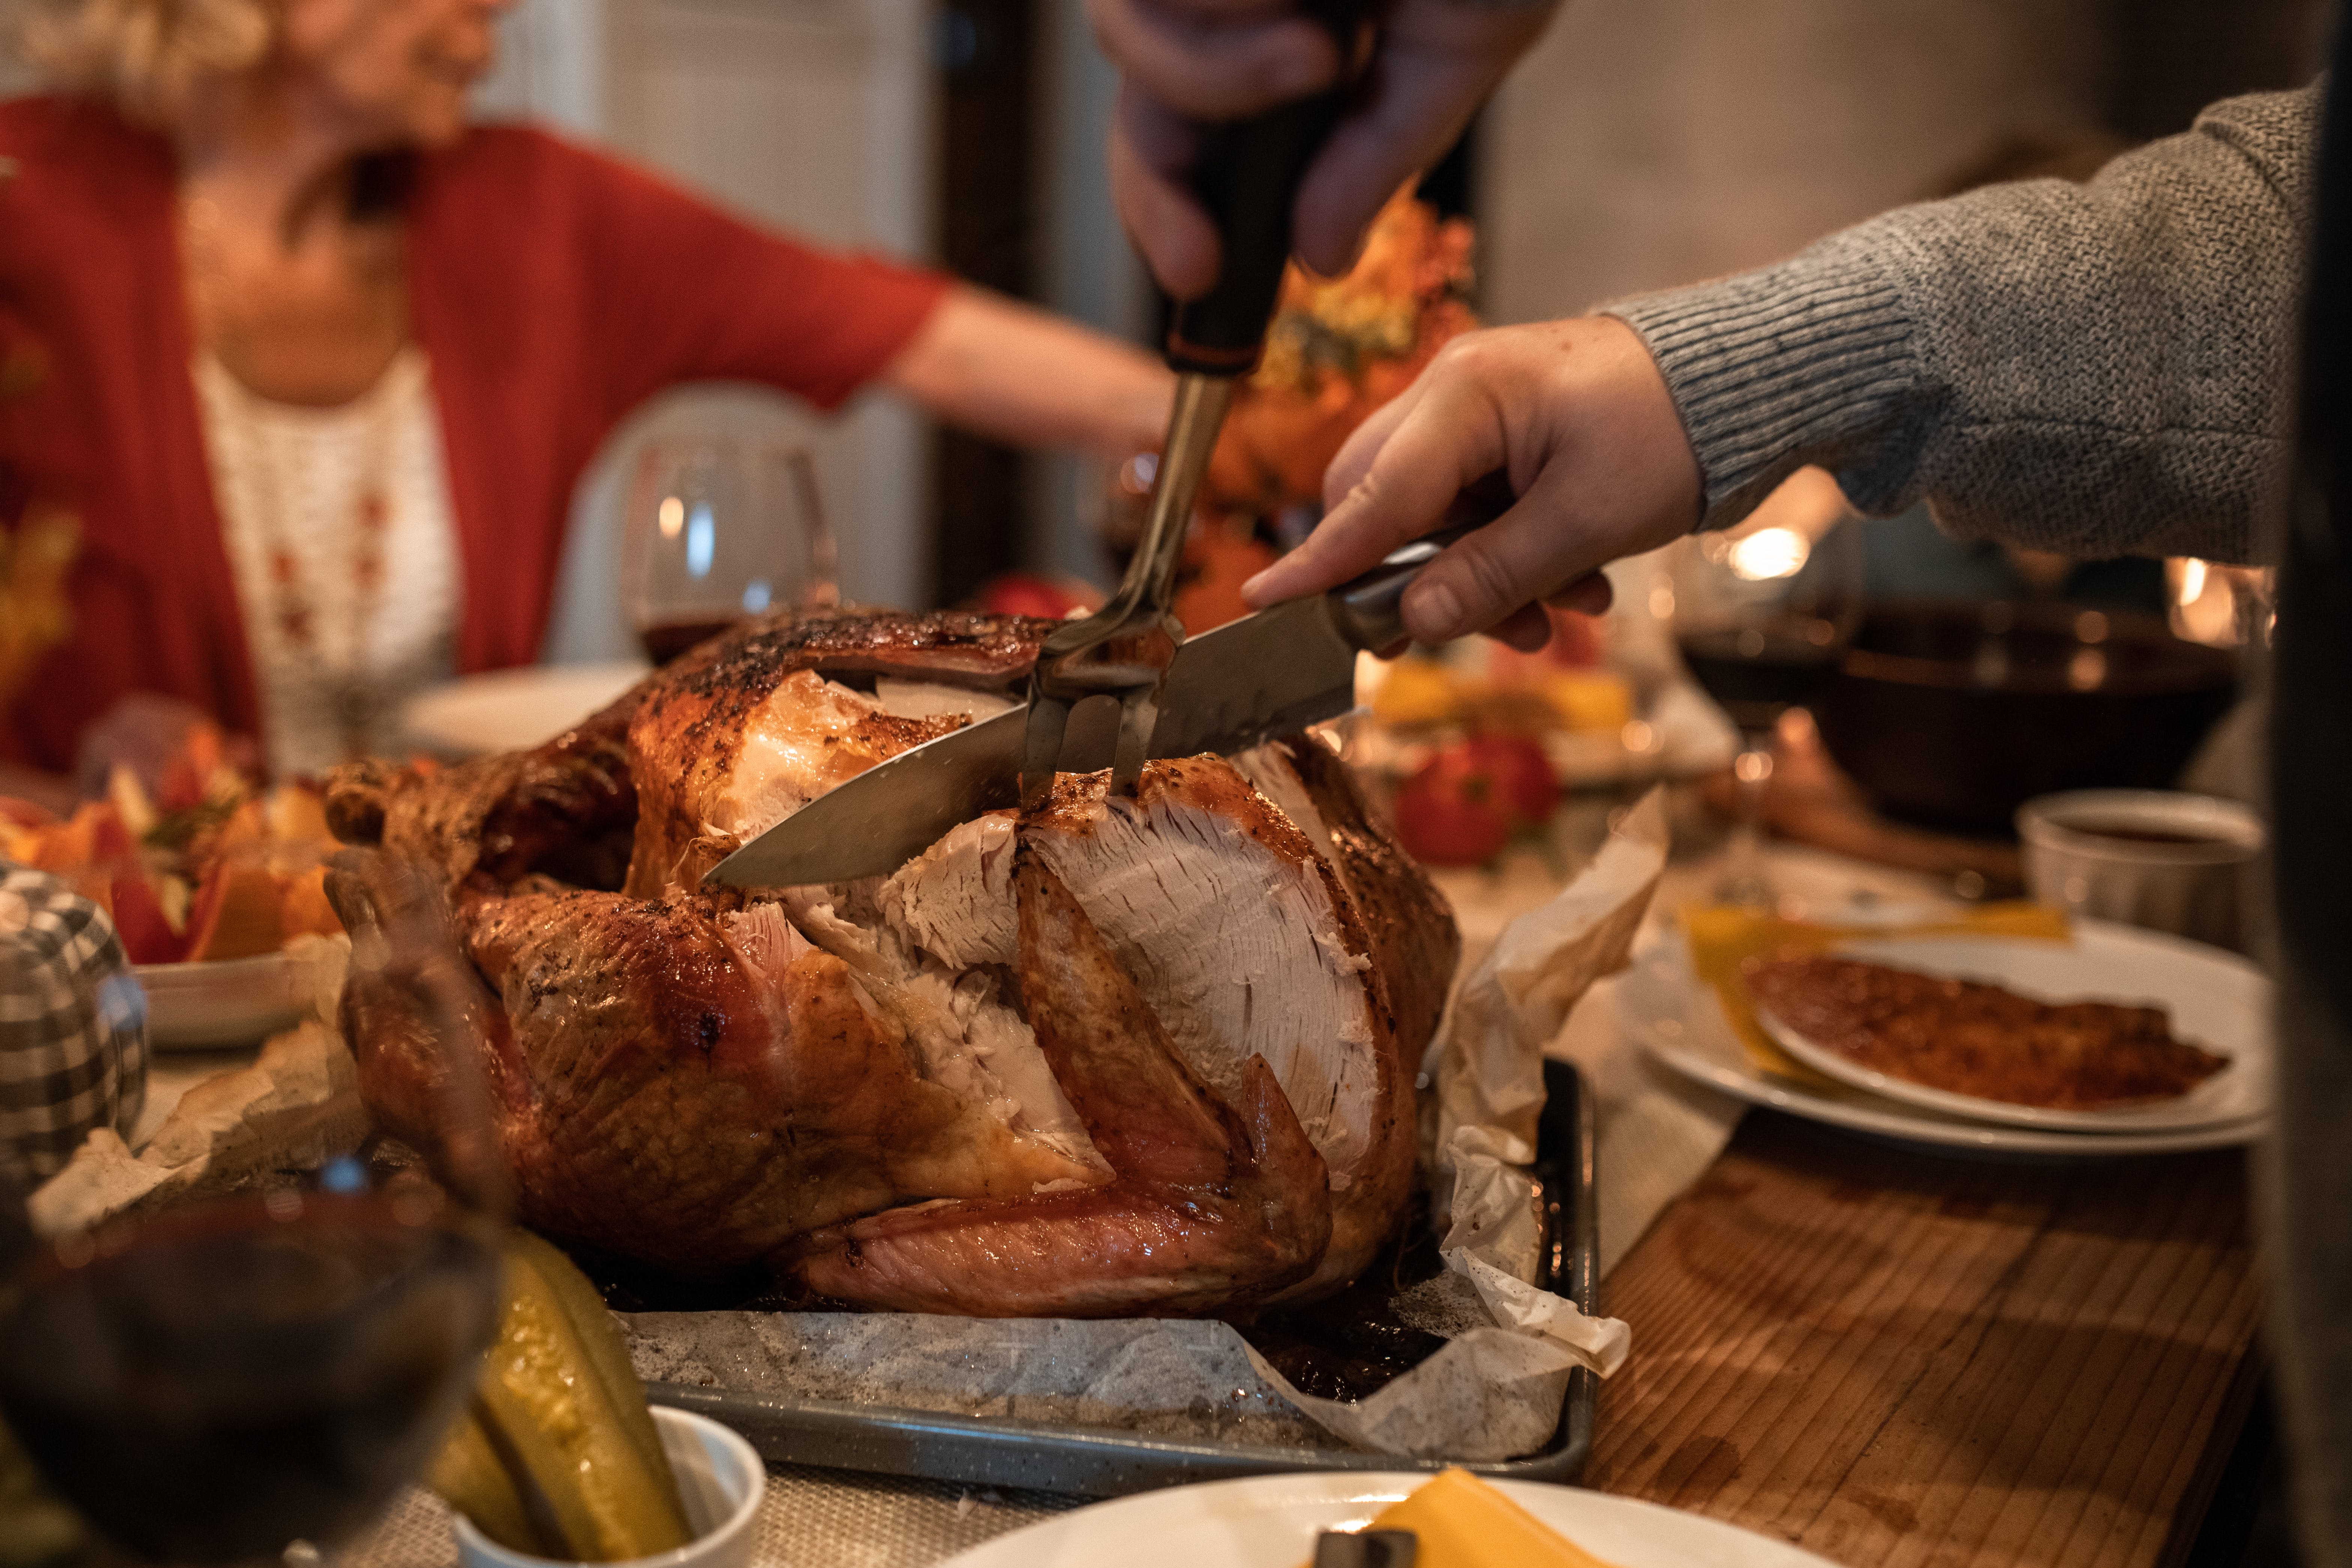 Meat being carved up for a family dinner | Source: Pexels